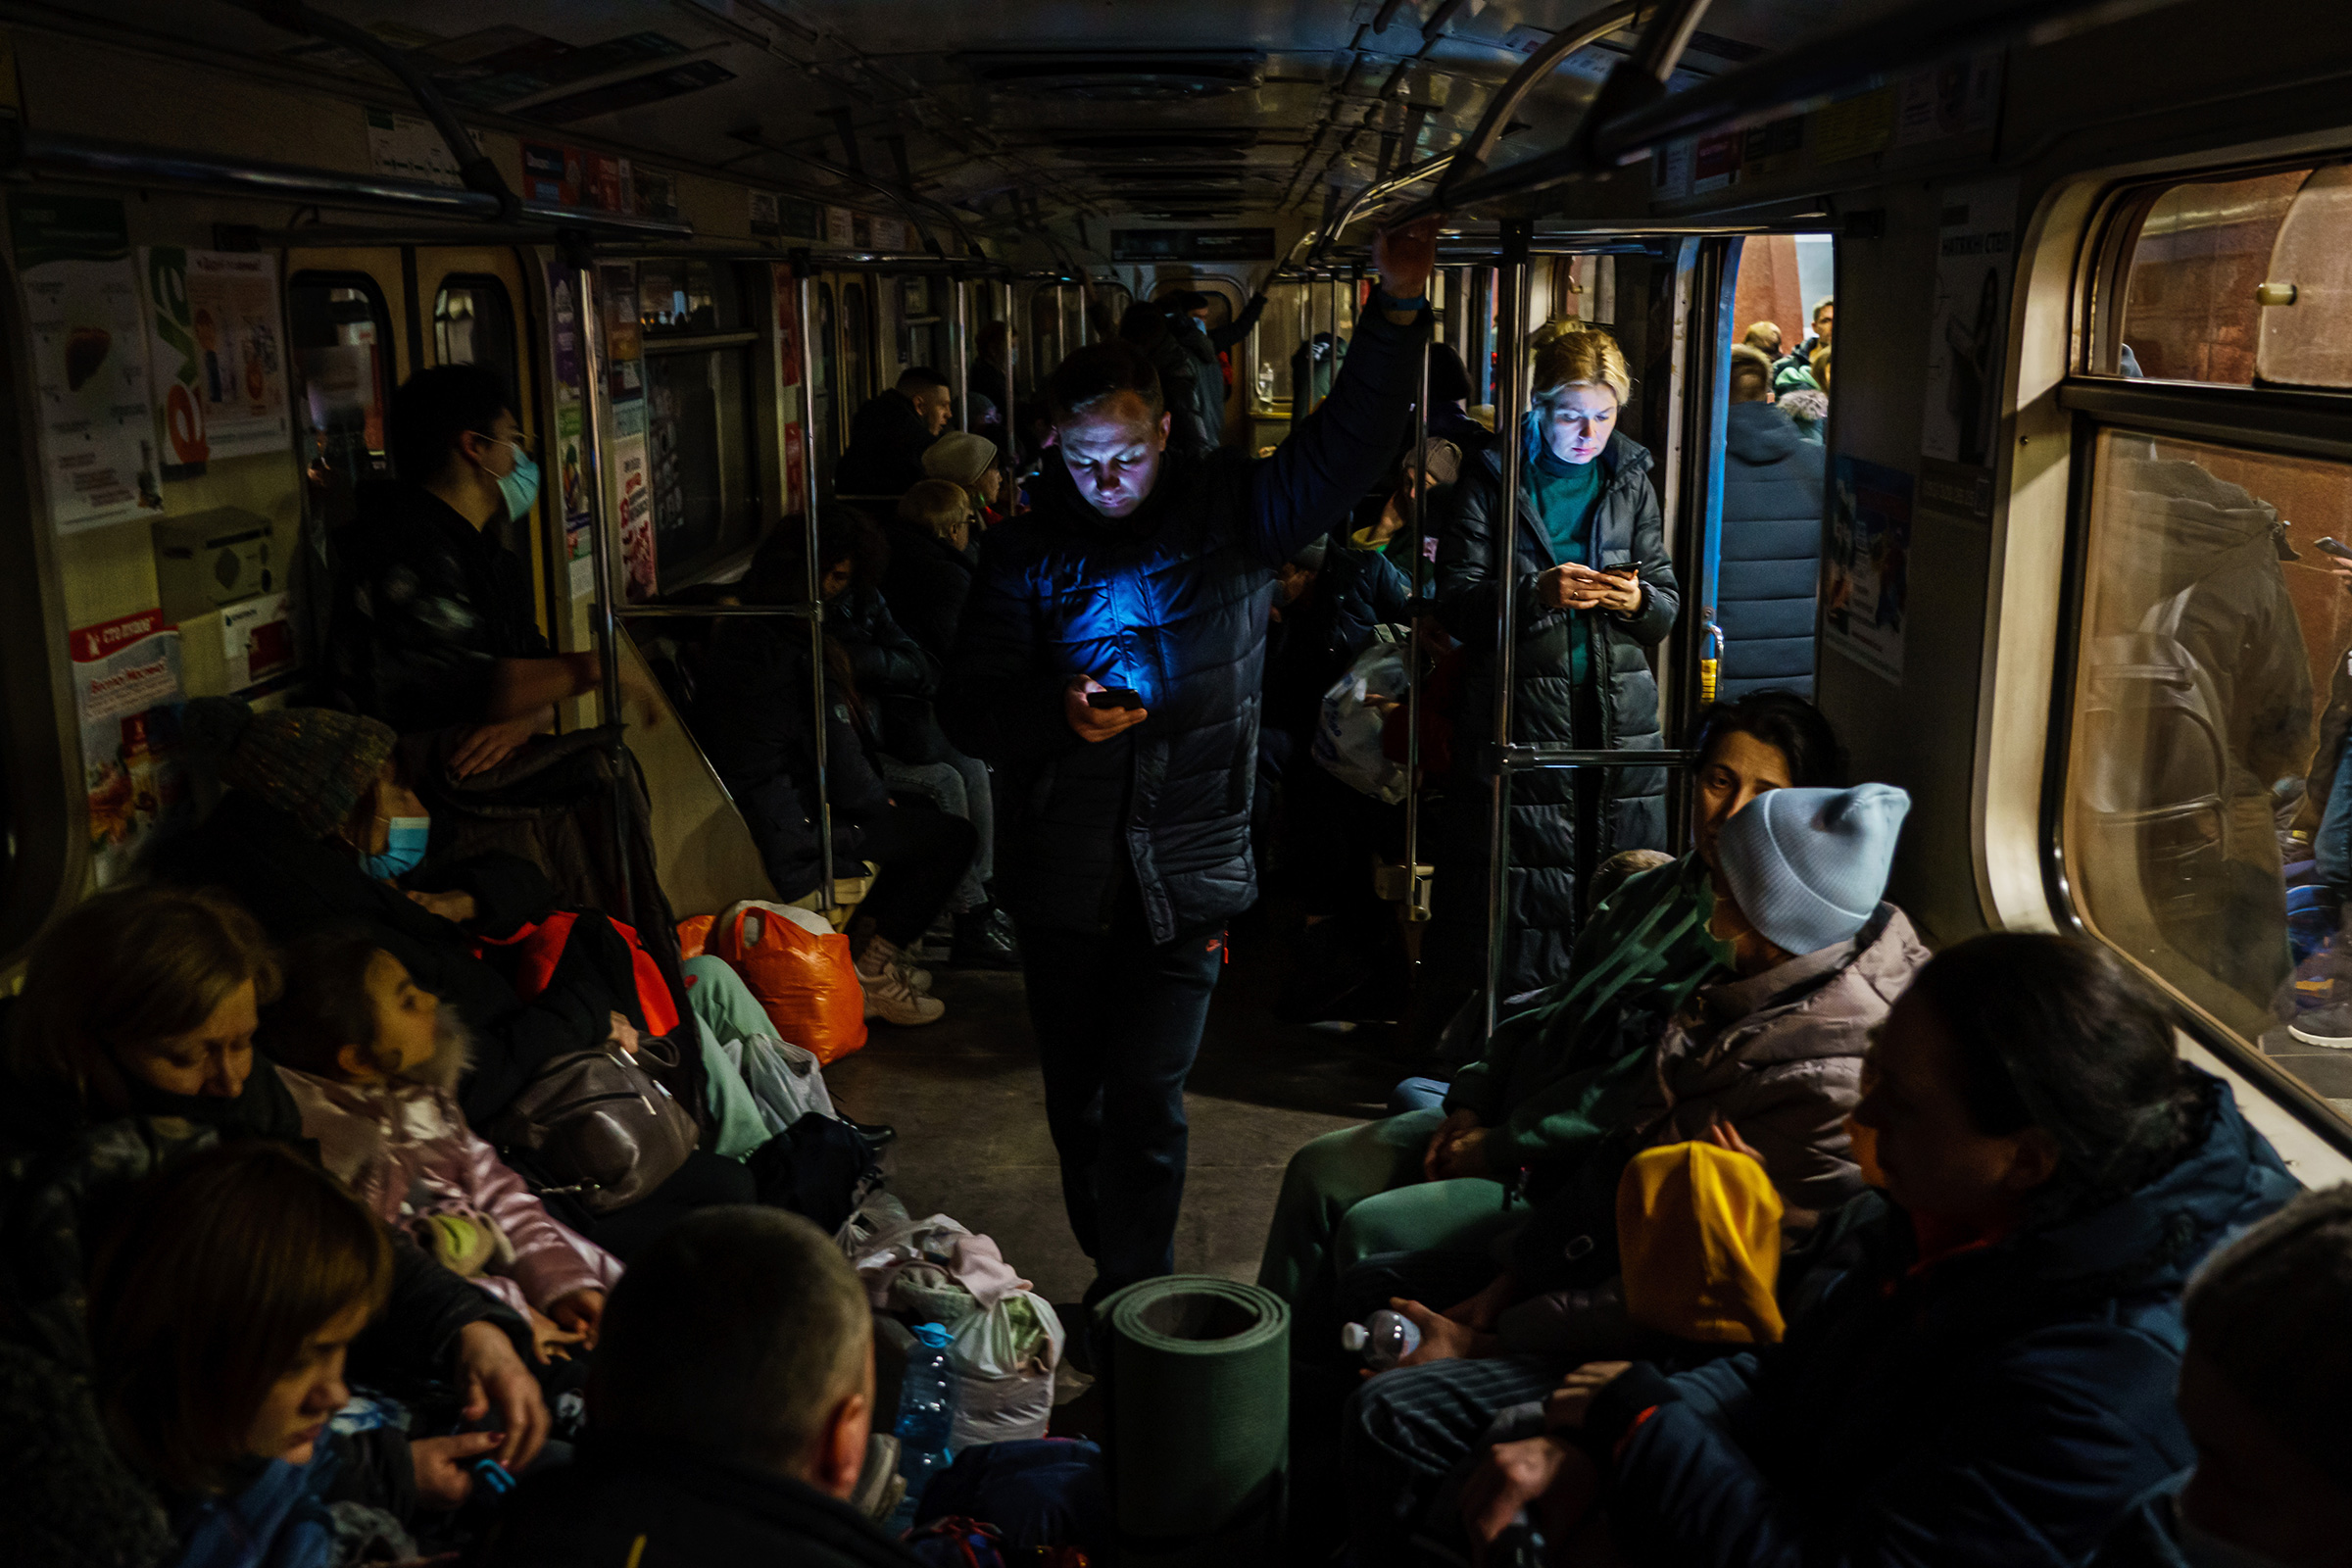 Hundreds of people seek shelter underground inside the dark train cars of a metro station in Kharkiv, as the Russian invasion of Ukraine continues on Feb. 24